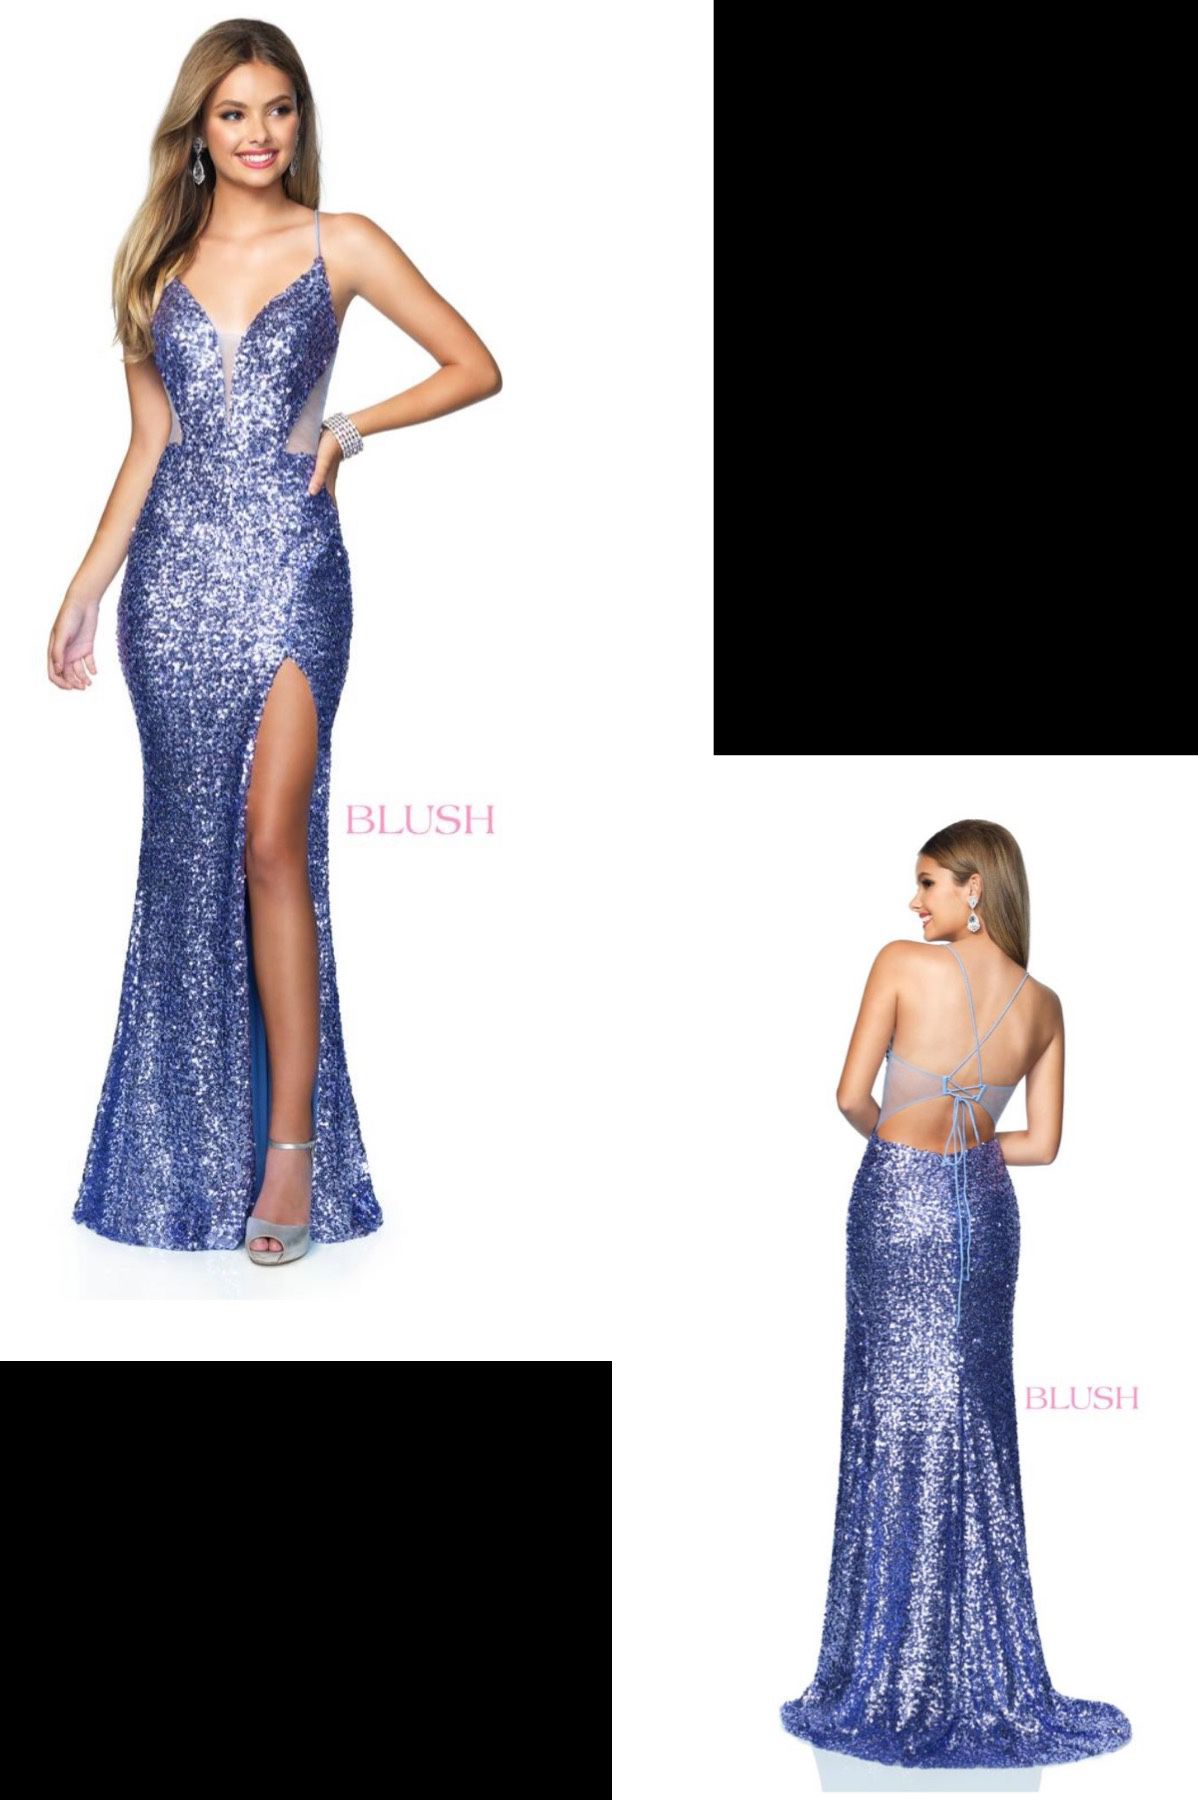 New With Tags Size 6 Formal Dress & Prom Dress By Blush Prom $215